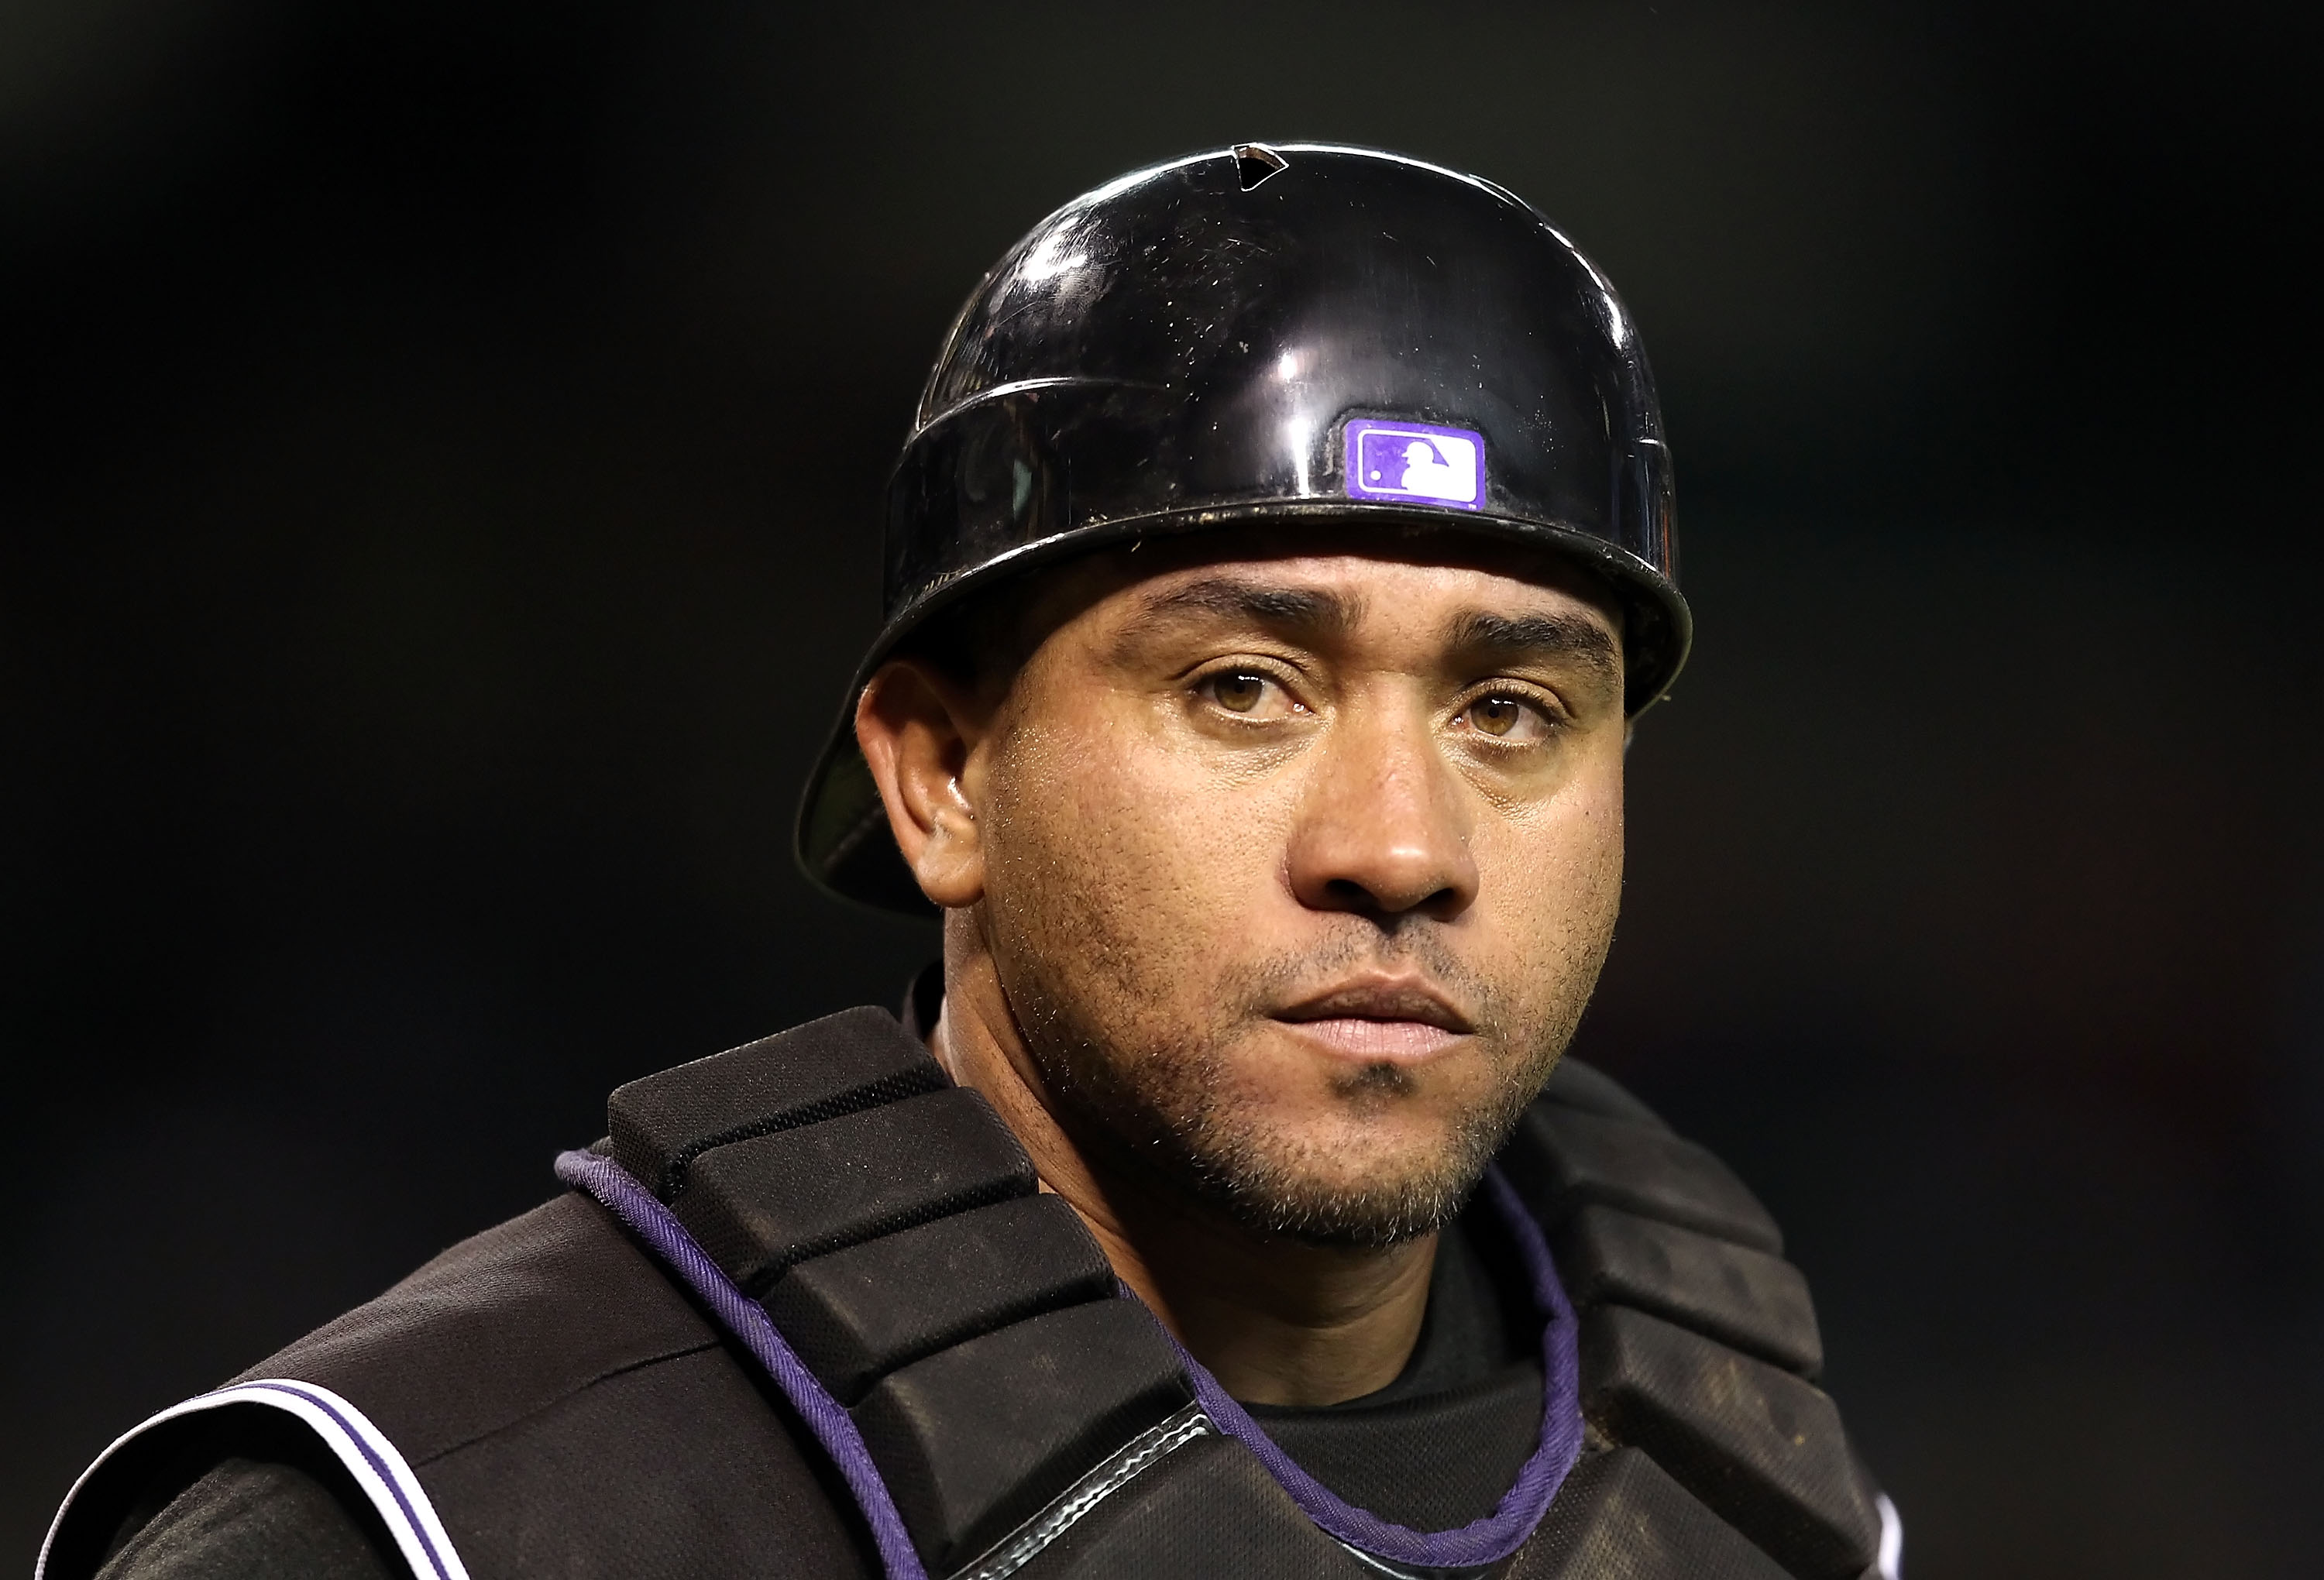 PHOENIX - SEPTEMBER 21:  Catcher Miguel Olivo #21 of the Colorado Rockies during the Major League Baseball game against the Arizona Diamondbacks at Chase Field on September 21, 2010 in Phoenix, Arizona.  (Photo by Christian Petersen/Getty Images)